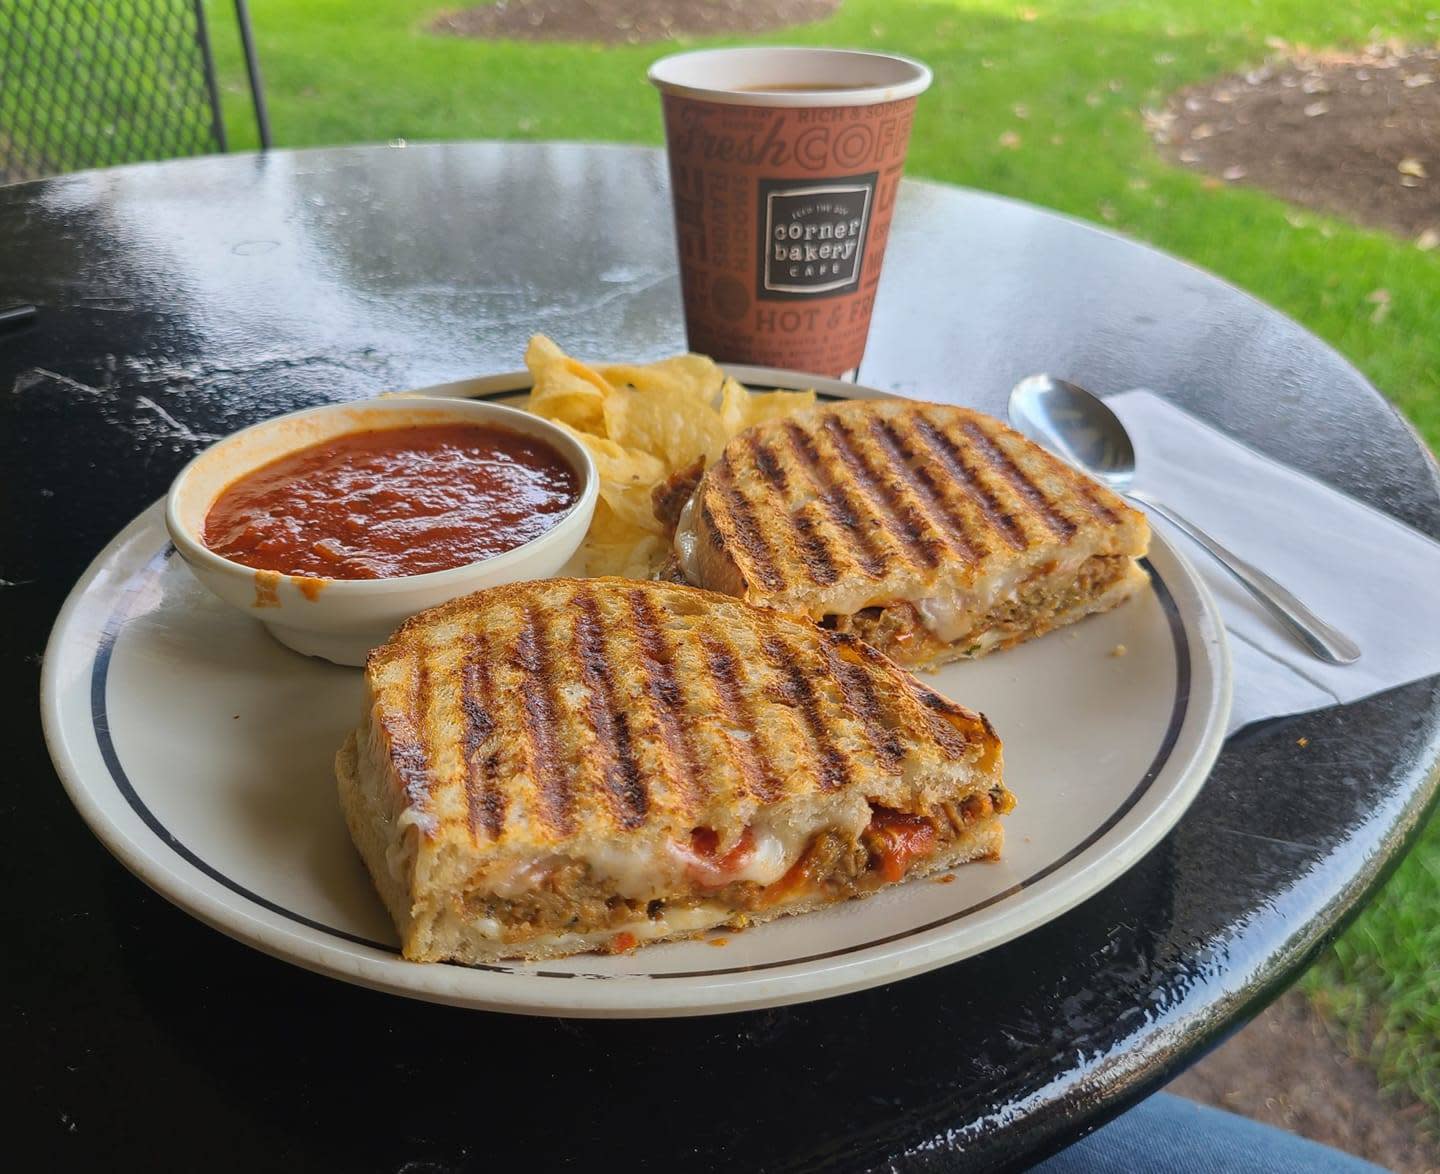 Corner Bakery Panini with Sause, Chips and Drink